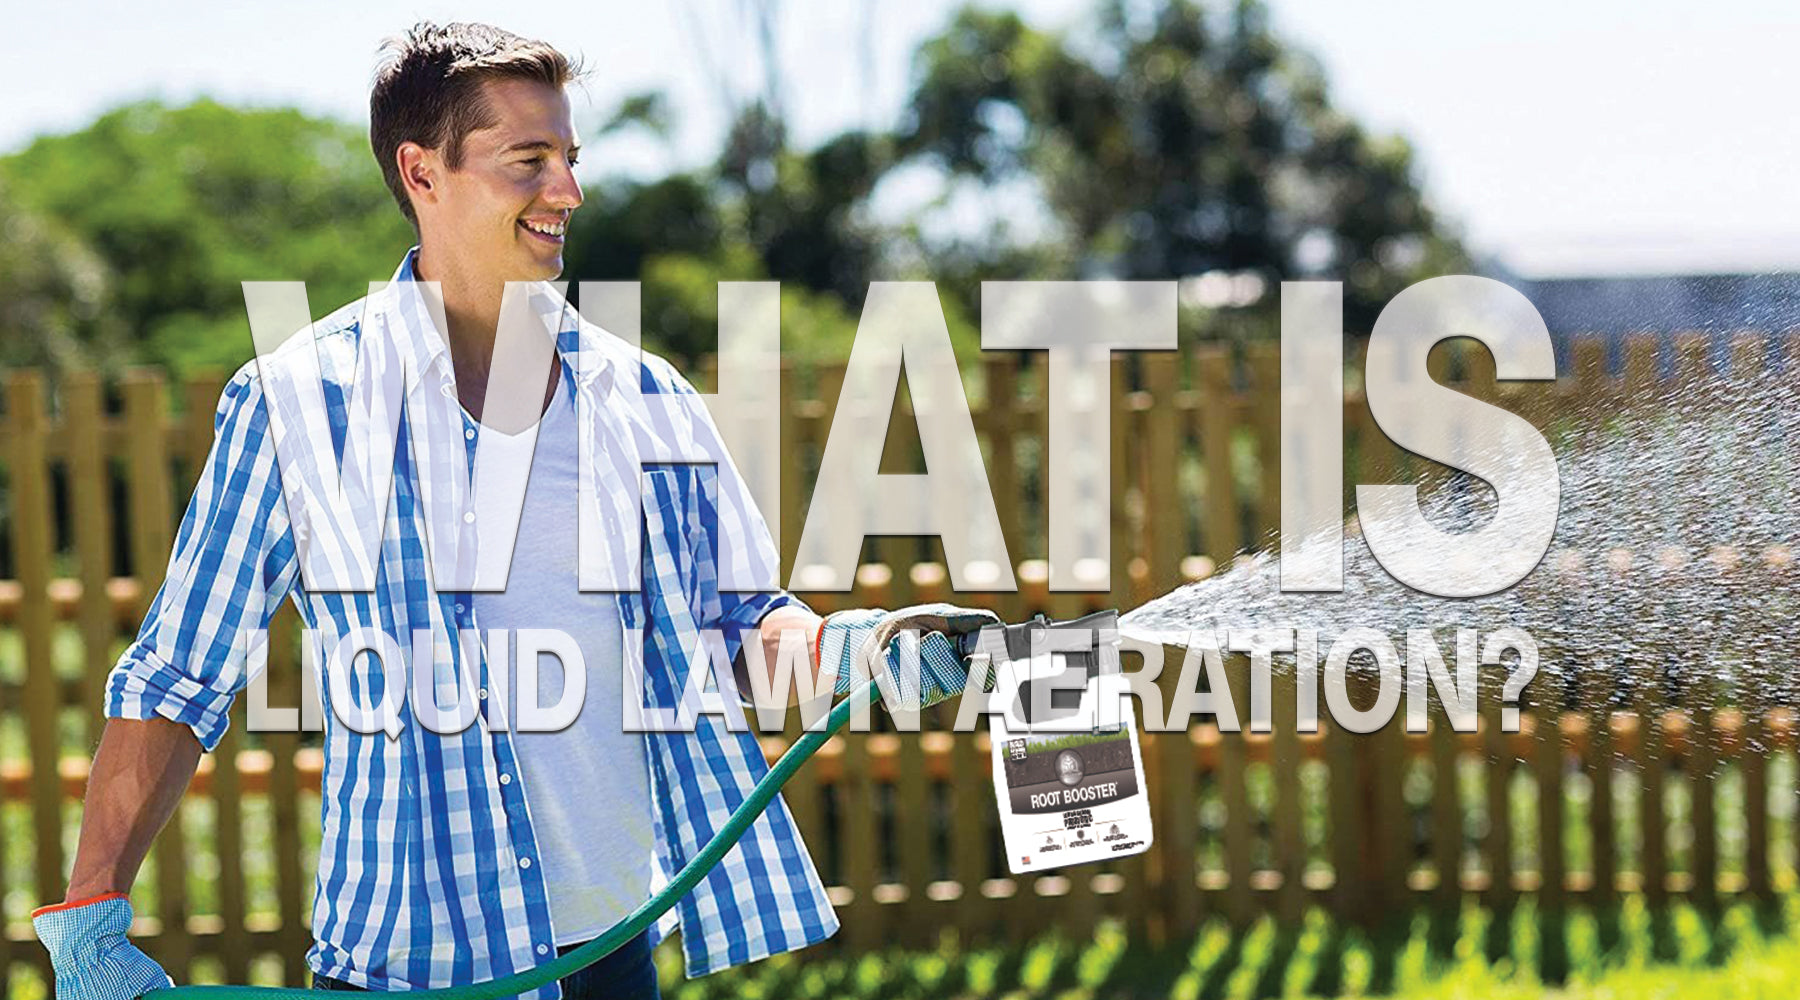 What is Liquid Lawn Aeration?